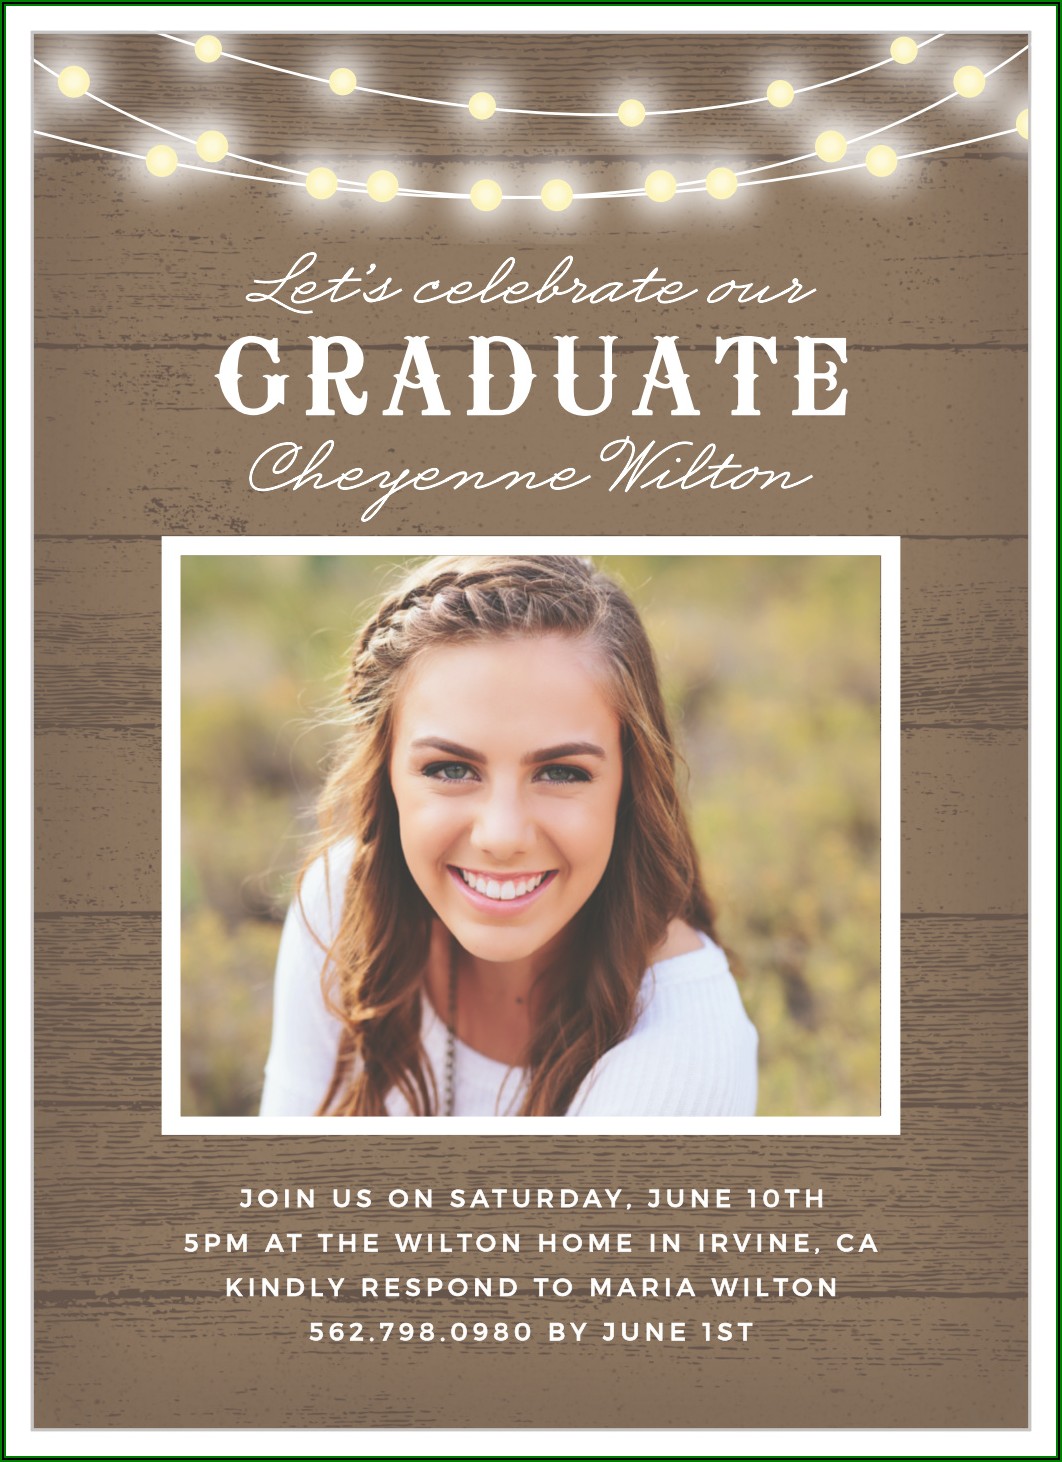 What Is The Difference Between A Graduation Announcement And An Invitation